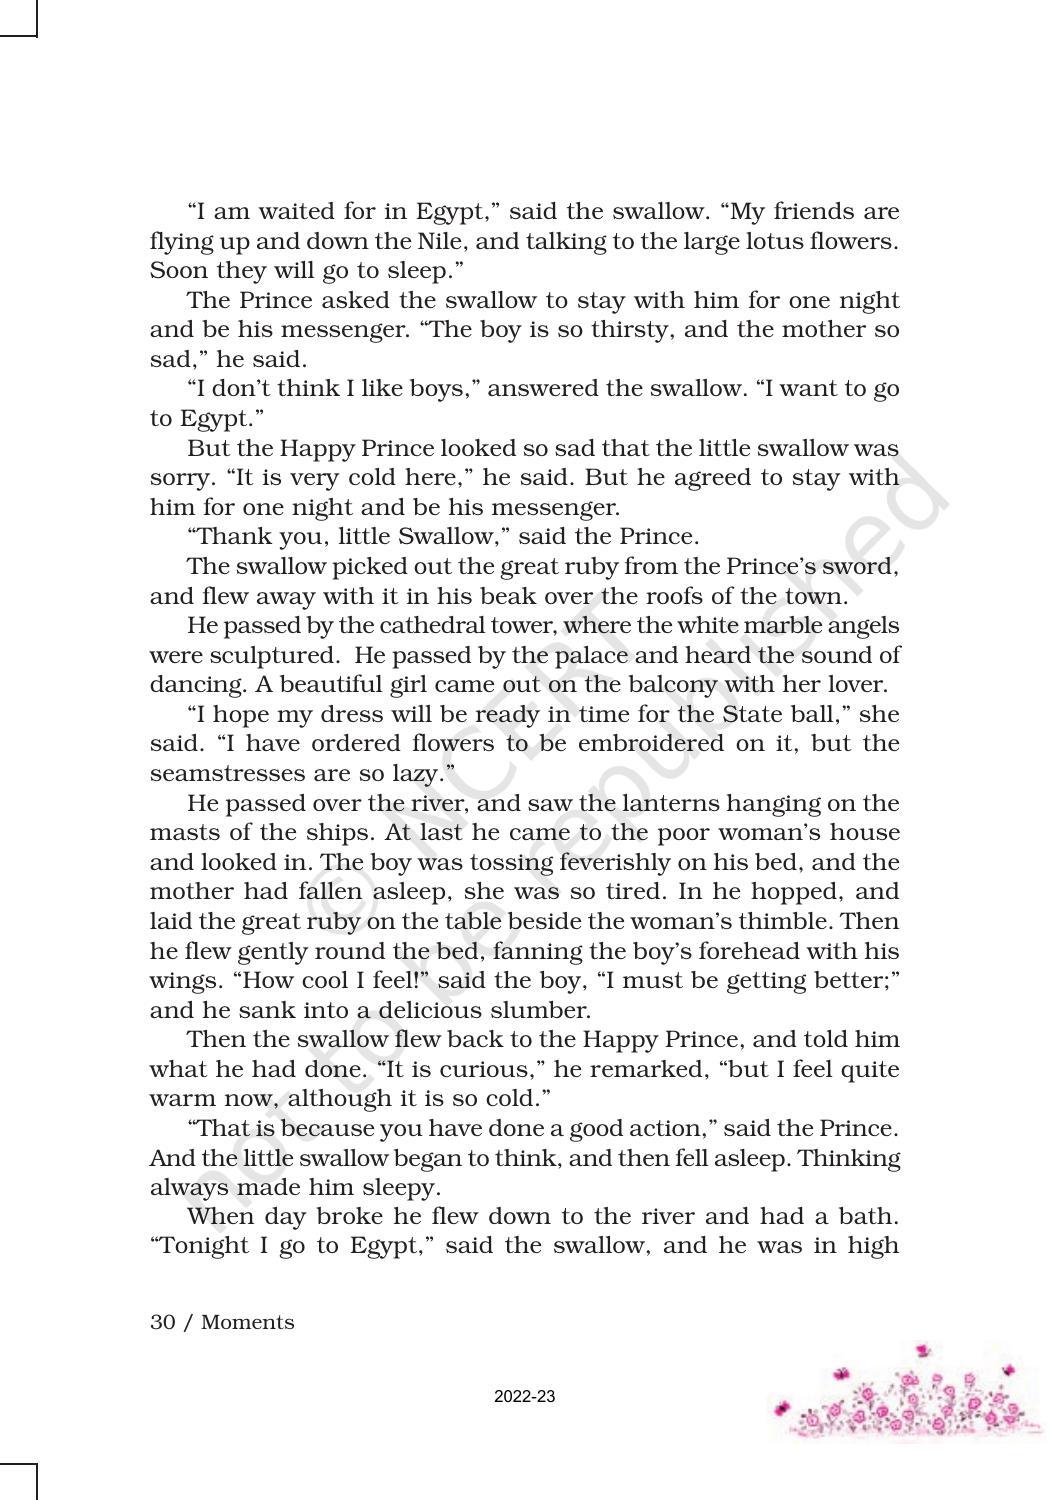 NCERT Book for Class 9 English Moment Chapter 5 The Happy Prince - Page 3